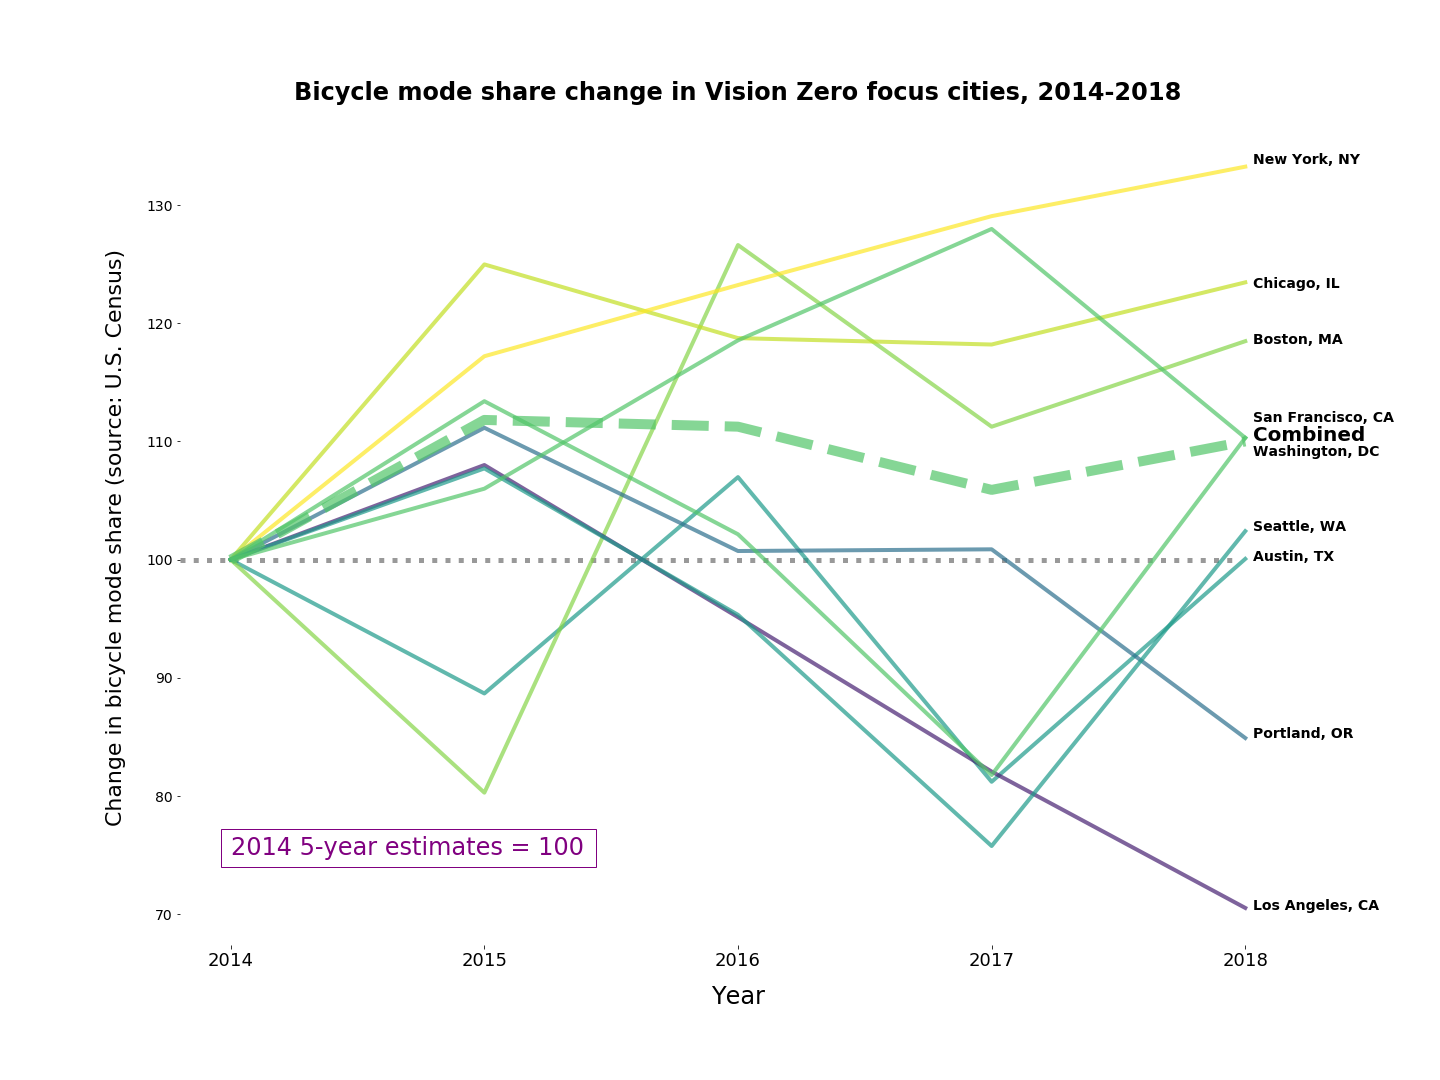 Graph showing cycling mode share change in nine Vision Zero cities from 2014-2018, showing a moderate increase of about 10% in aggregate.